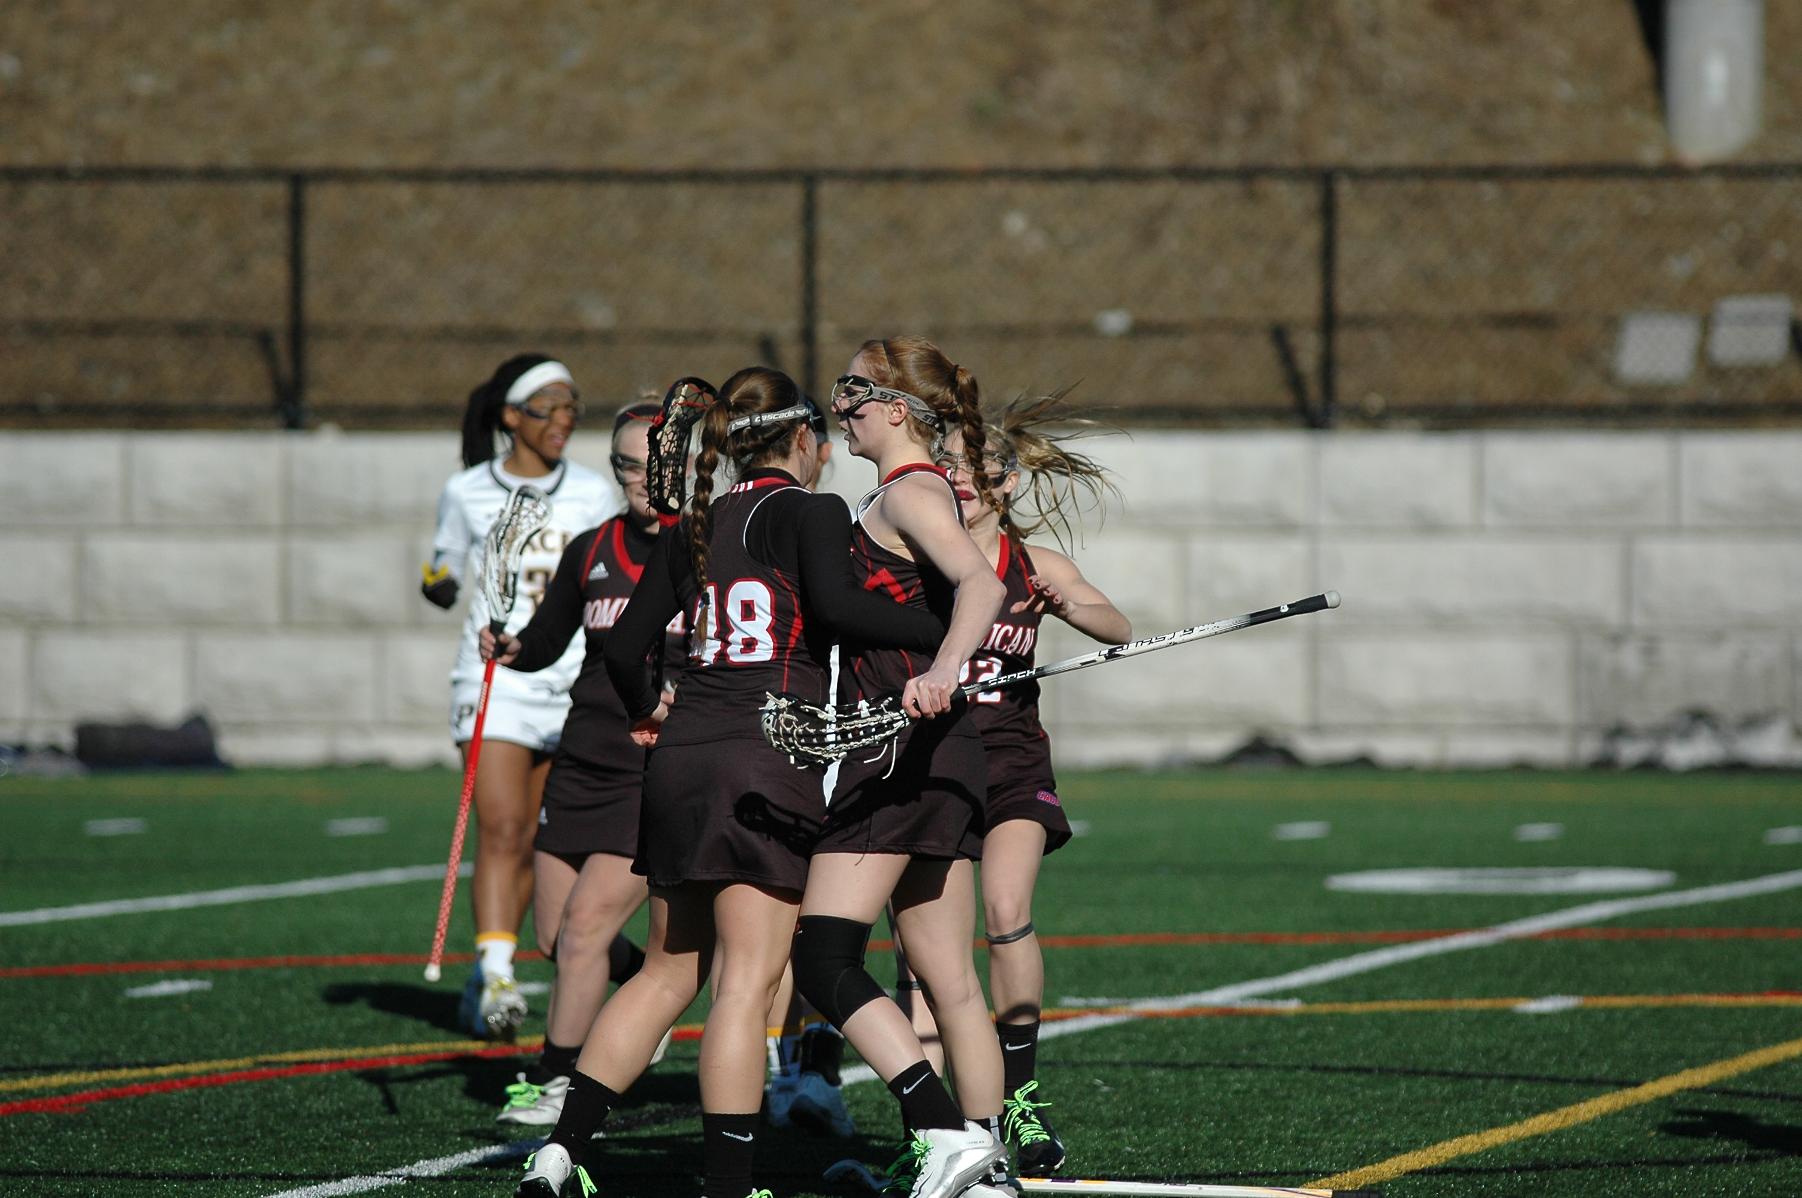 WOMEN'S LACROSSE NOTCHES FIRST WIN OF THE SEASON